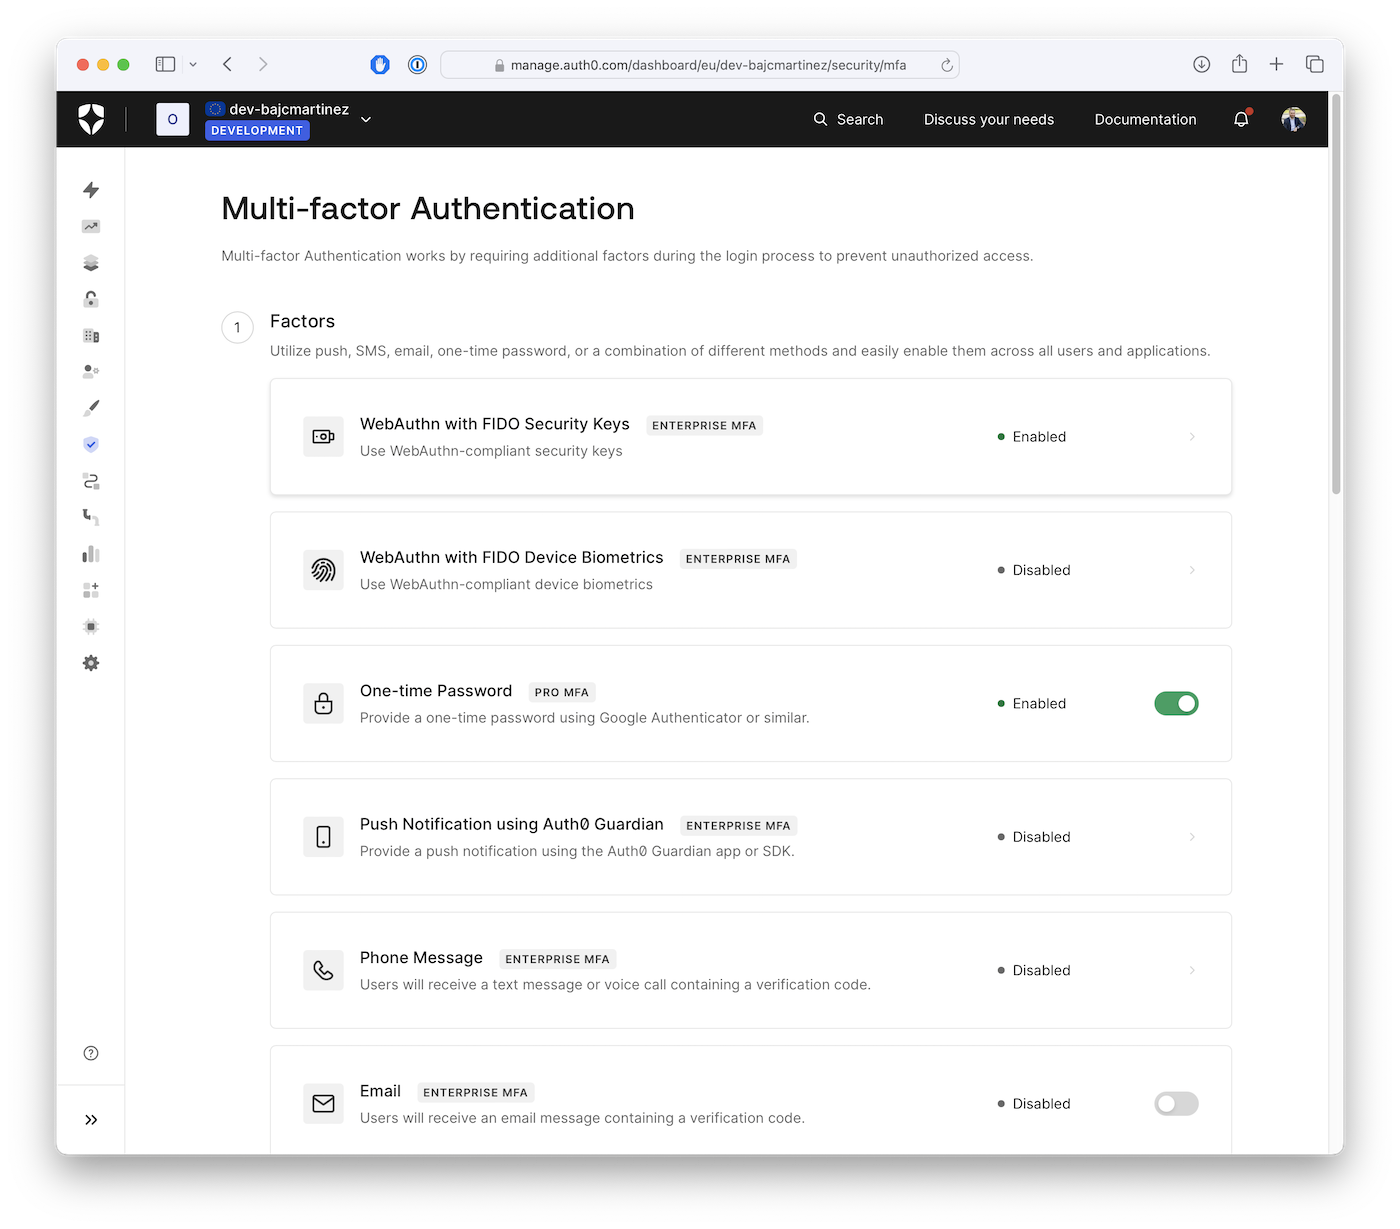 Auth0 Dashboard > Security > Multi-factor Auth